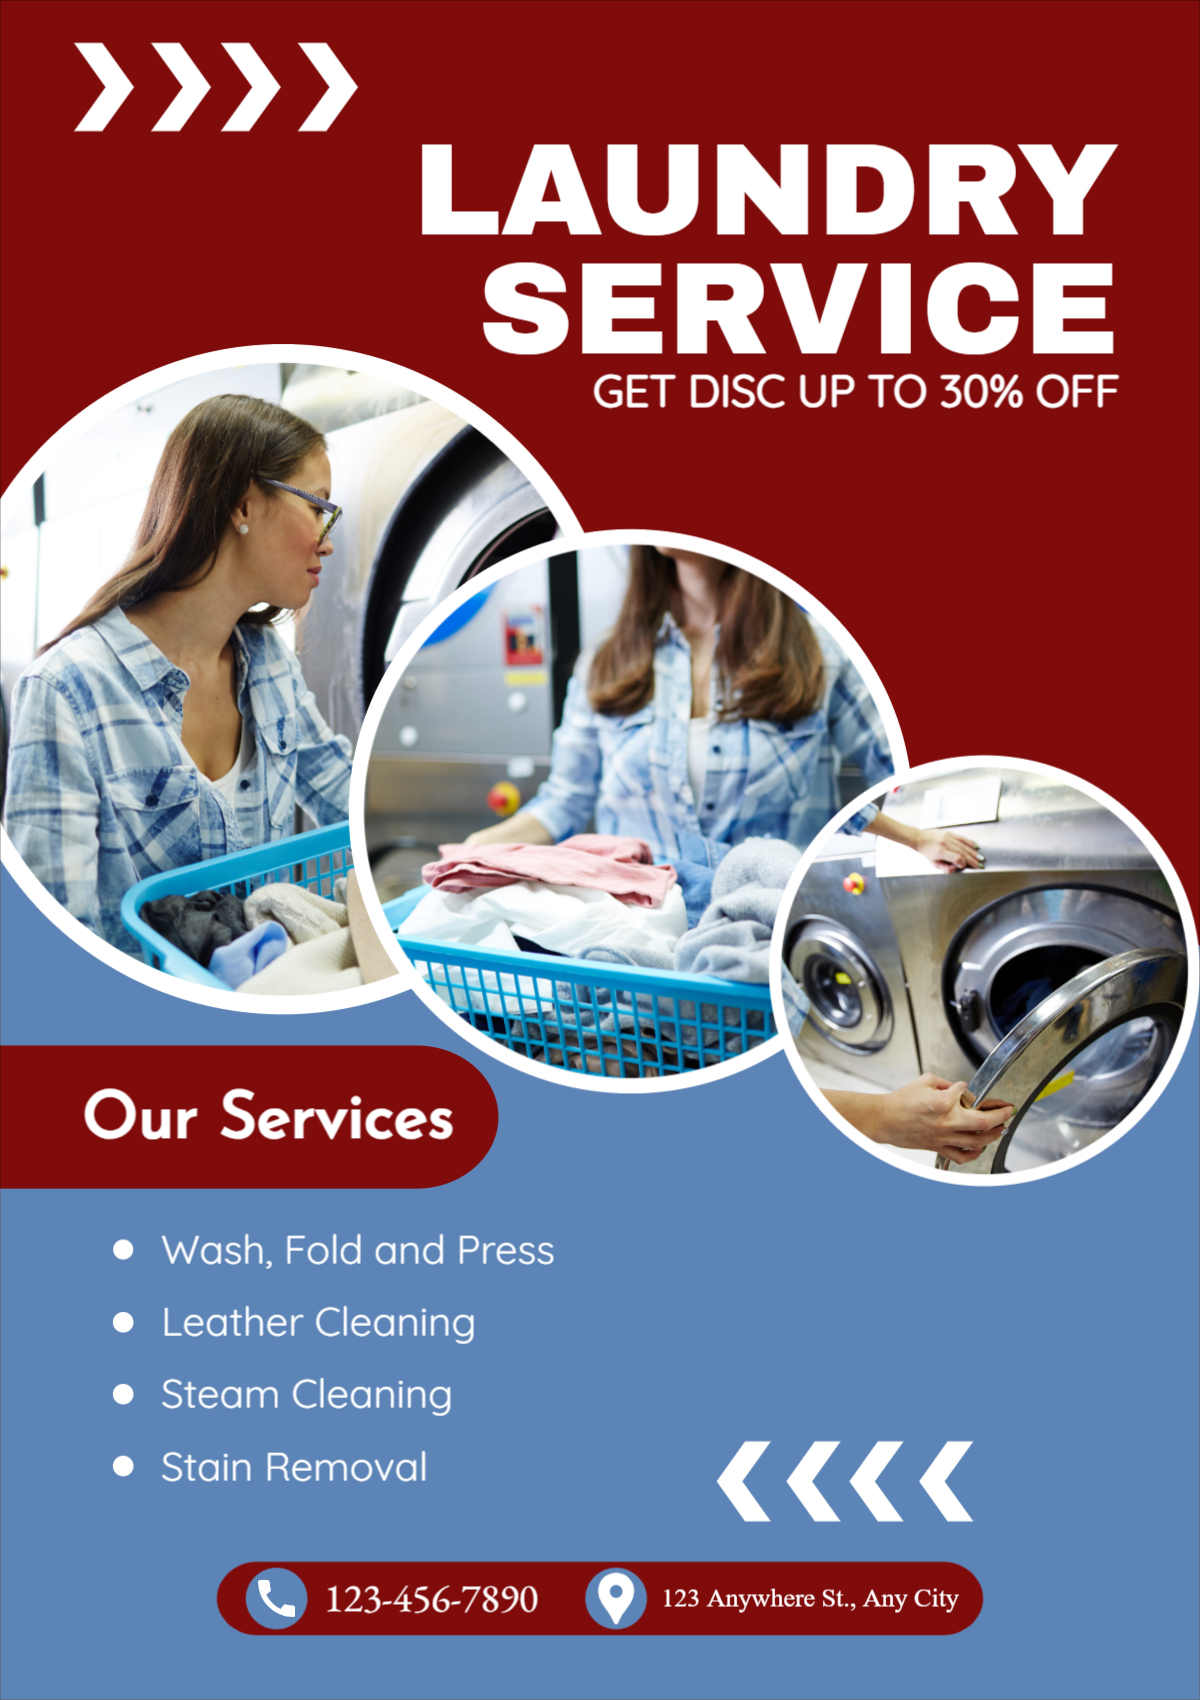 Laundry Service  poster design download for free